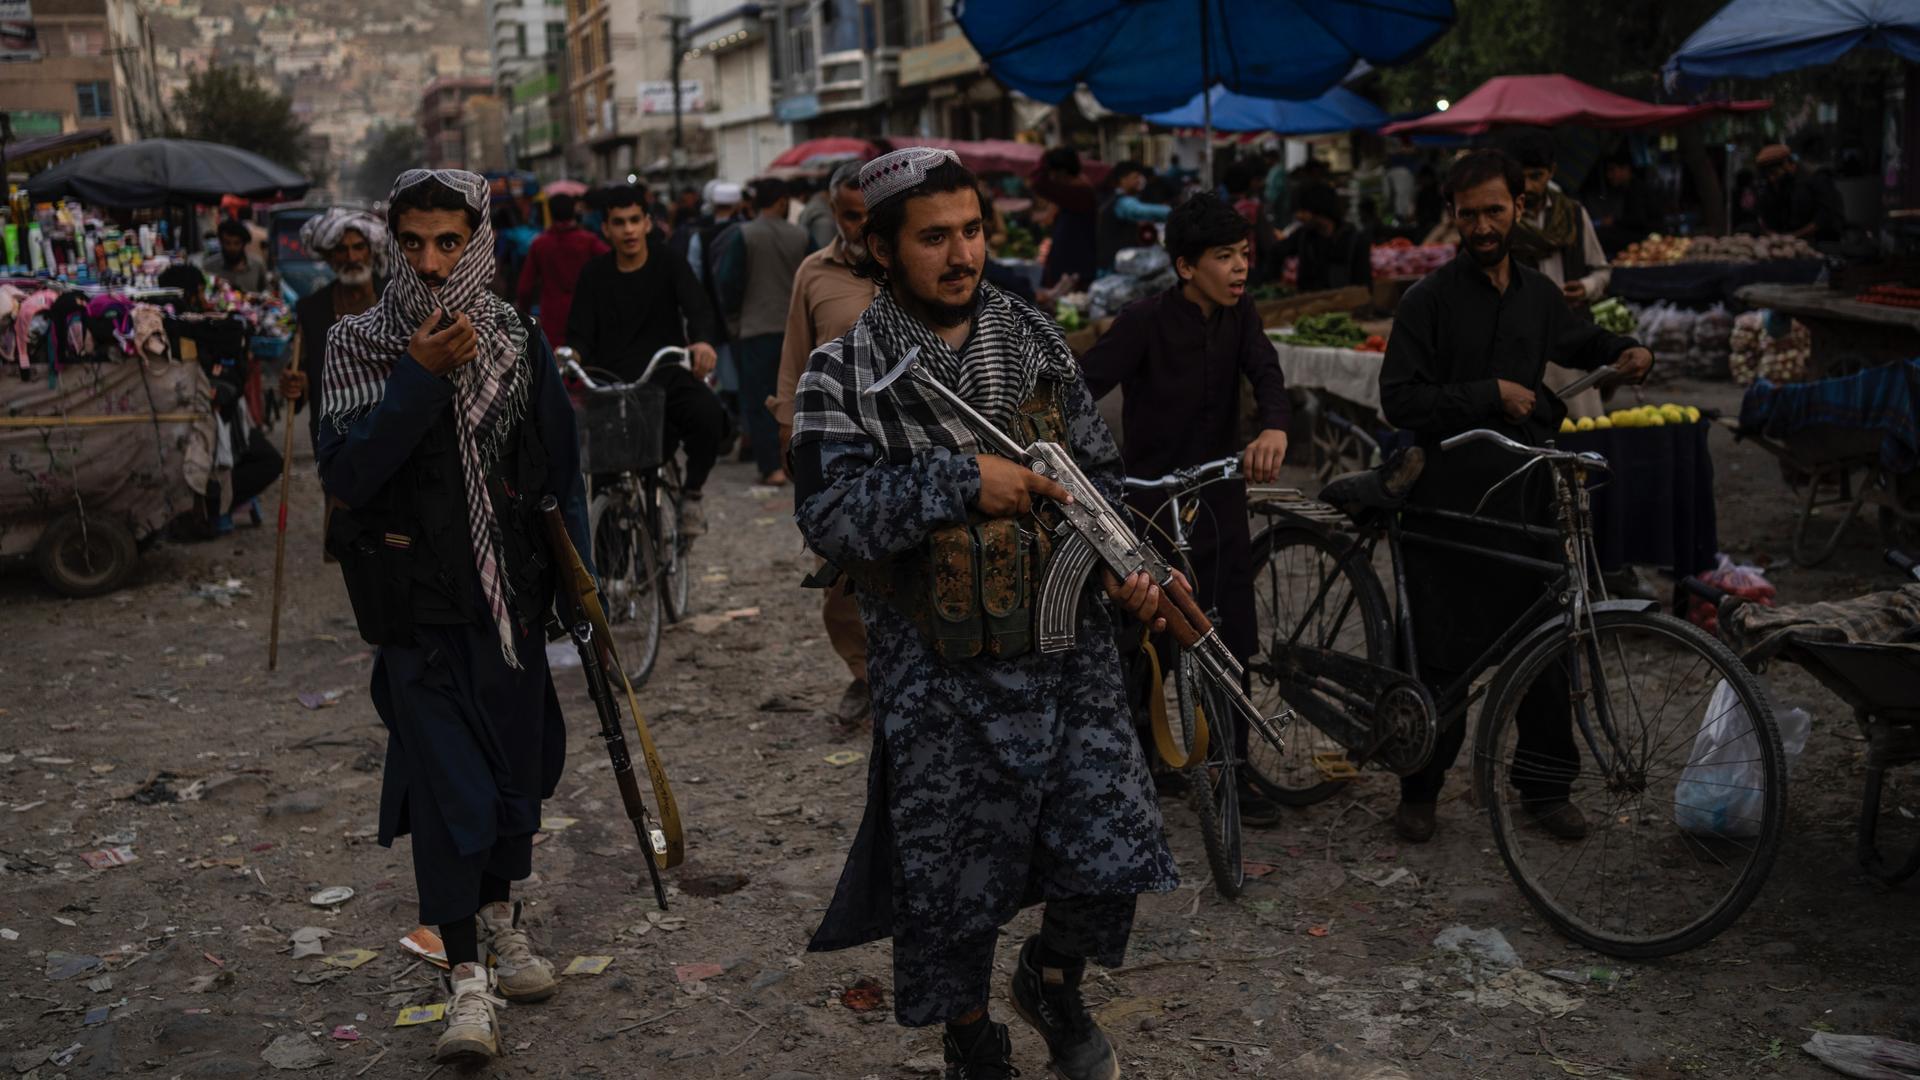 Taliban fighters patrol a market in Kabul's Old City, Afghanistan, Sept. 14, 2021.